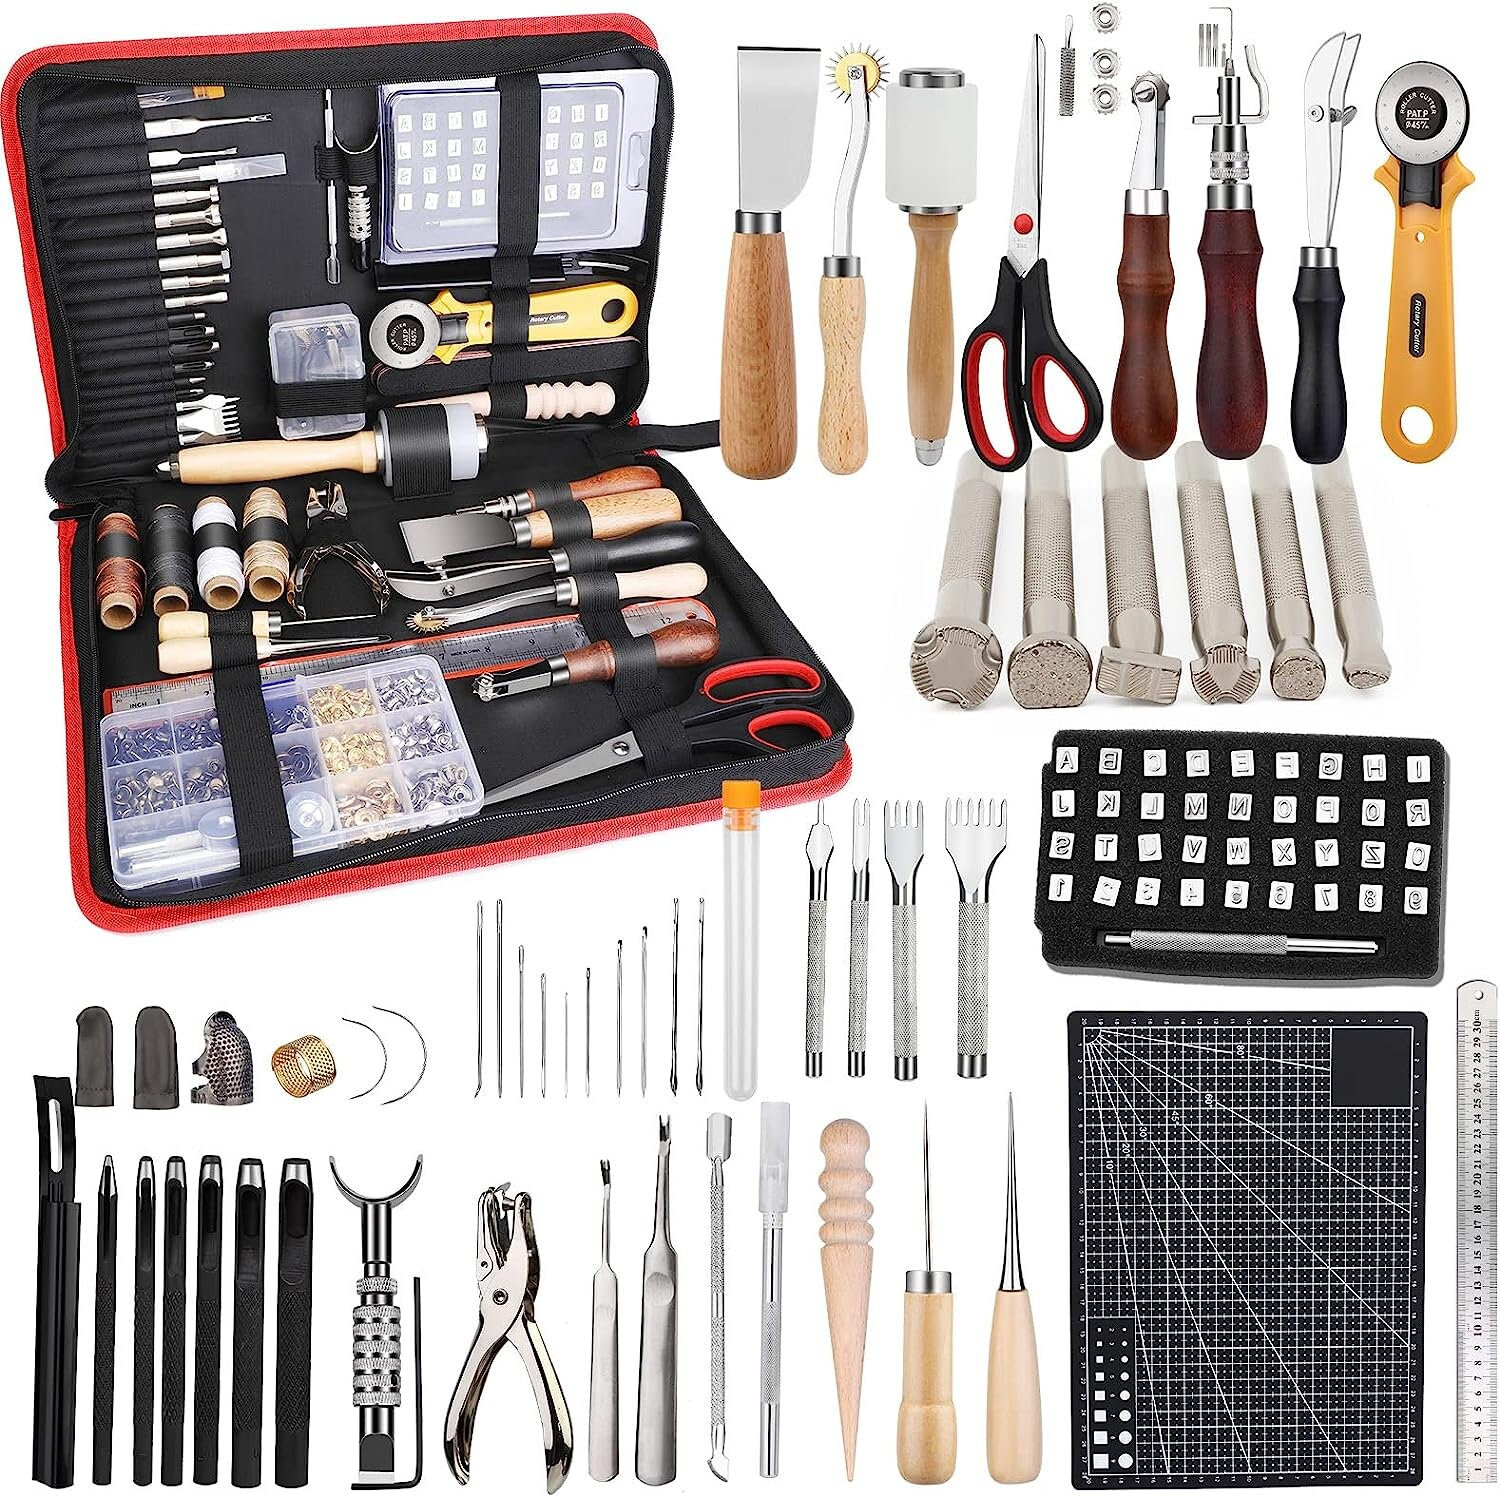 BUTUZE Leather Kit, Leather Tooling Kit, Practical Leather Working Tools  with Leather Beveler, Groover, Stitching Punch Sewing Thread and Needles 